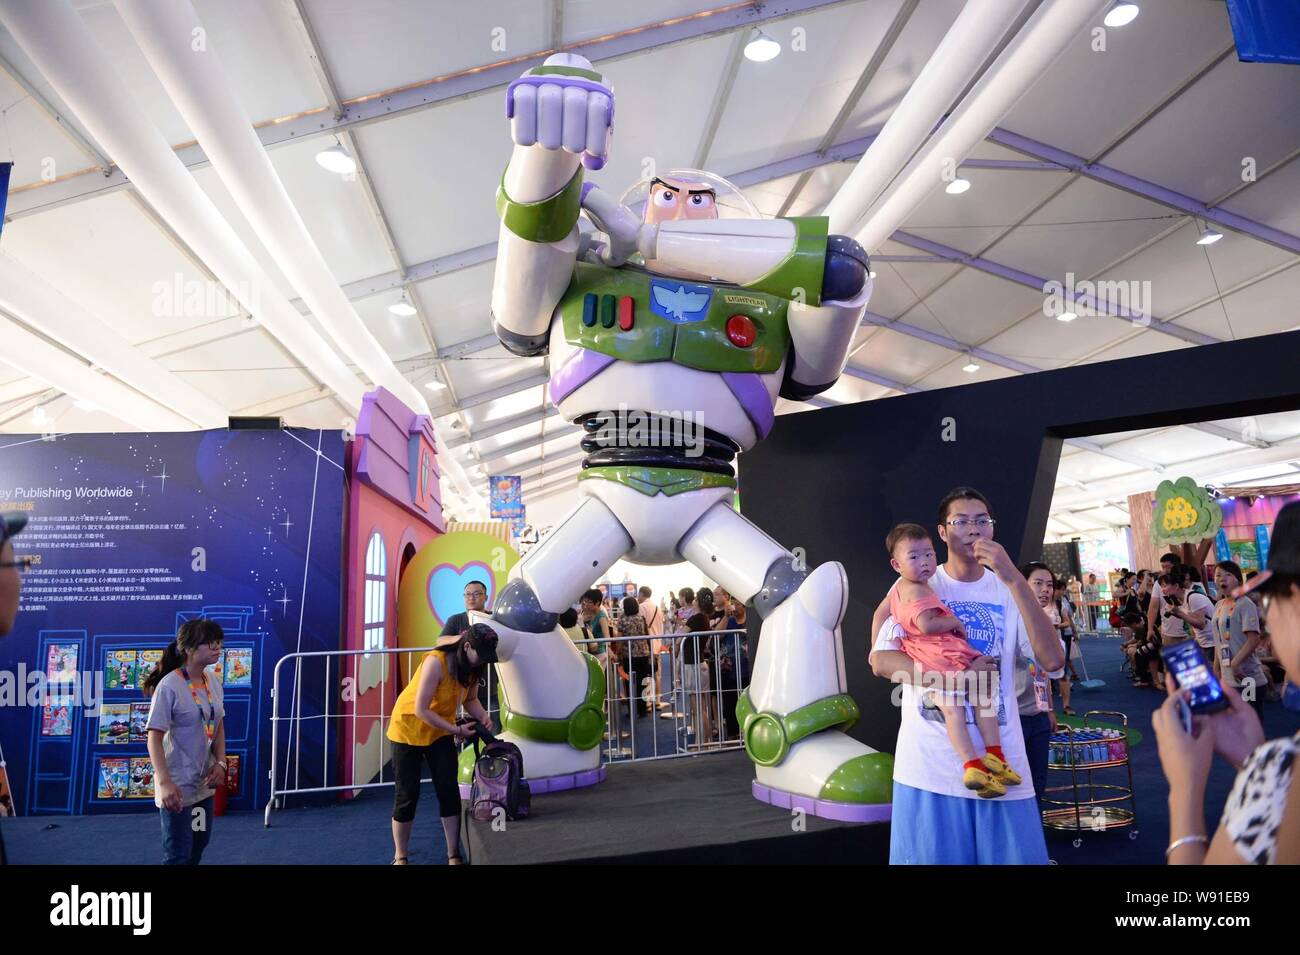 --FILE--Visitors take photos with a figure of Buzz Lightyear, a character in Toy Story produced by Disney, at the stand of Toy Story during an anime s Stock Photo